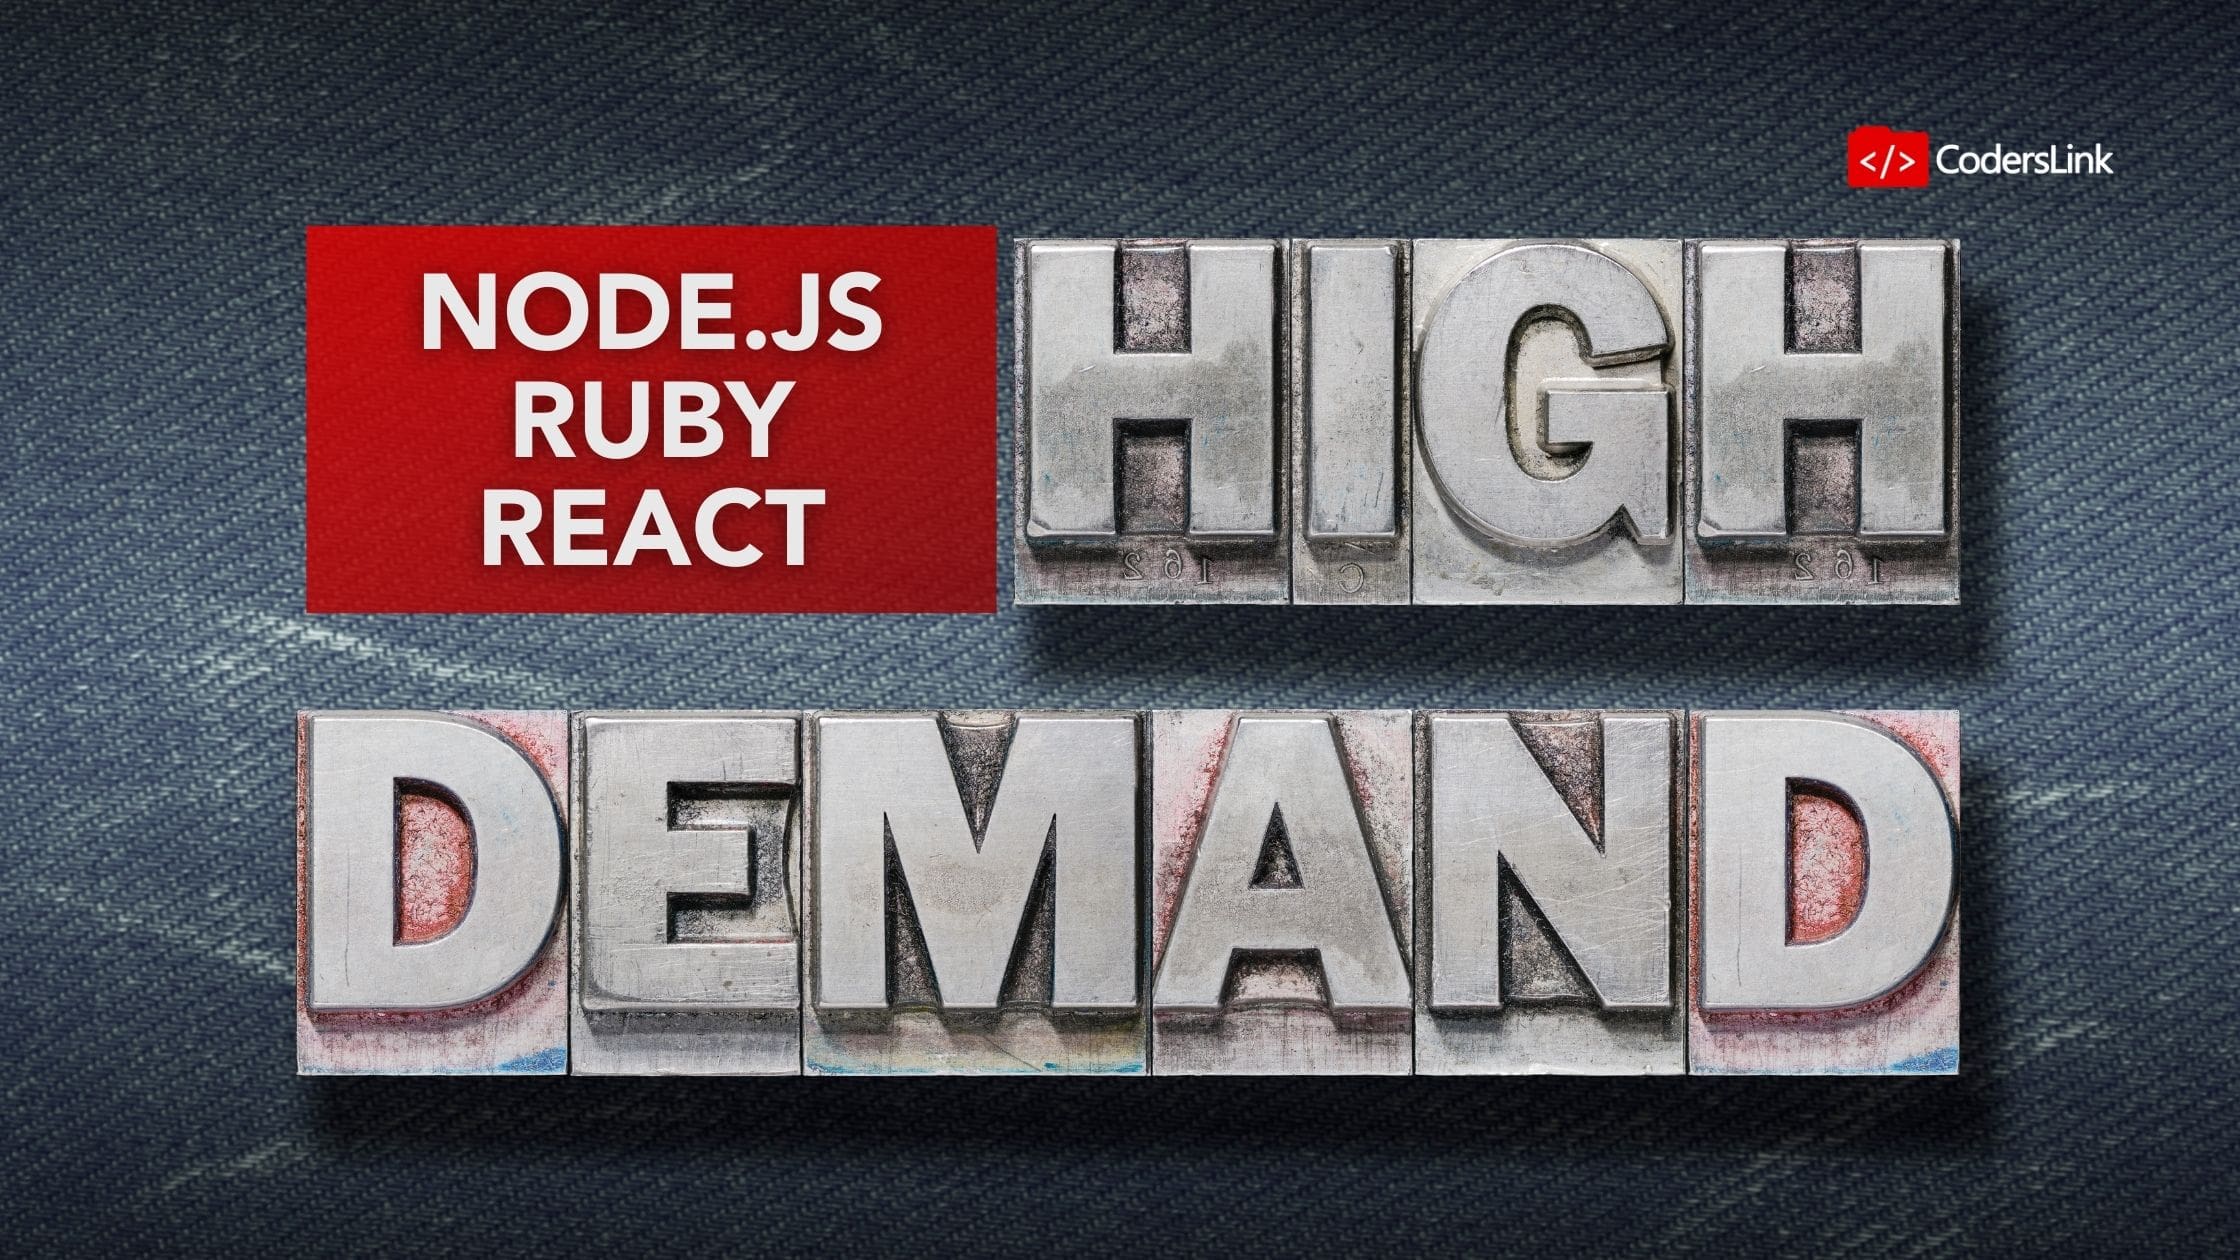 Shifts in Labor Demand for Node.js, React and Ruby Developers